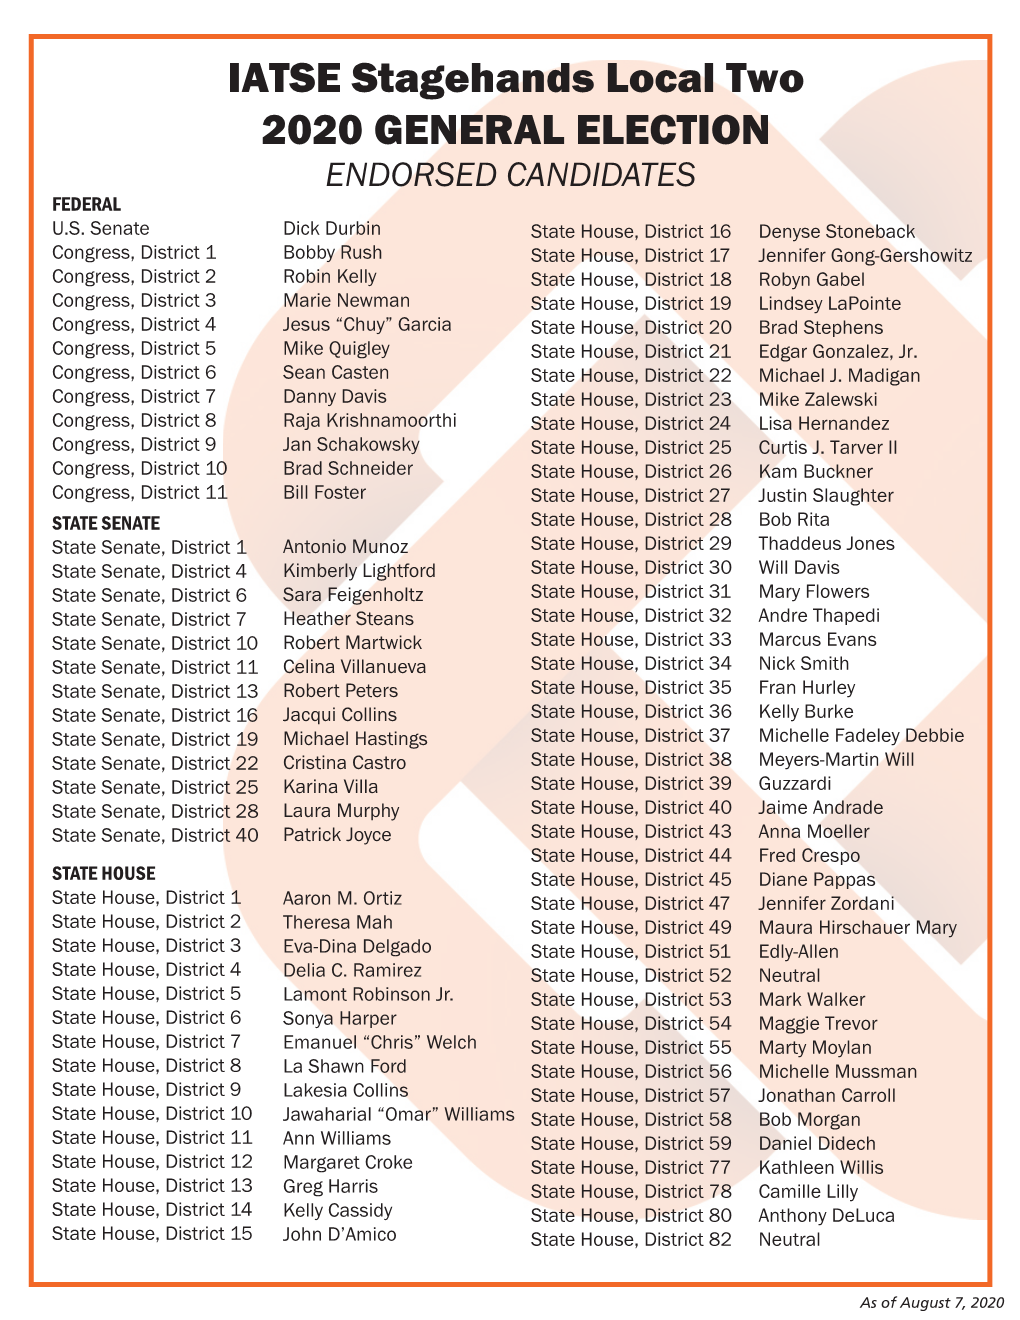 IATSE Stagehands Local Two 2020 GENERAL ELECTION ENDORSED CANDIDATES FEDERAL U.S